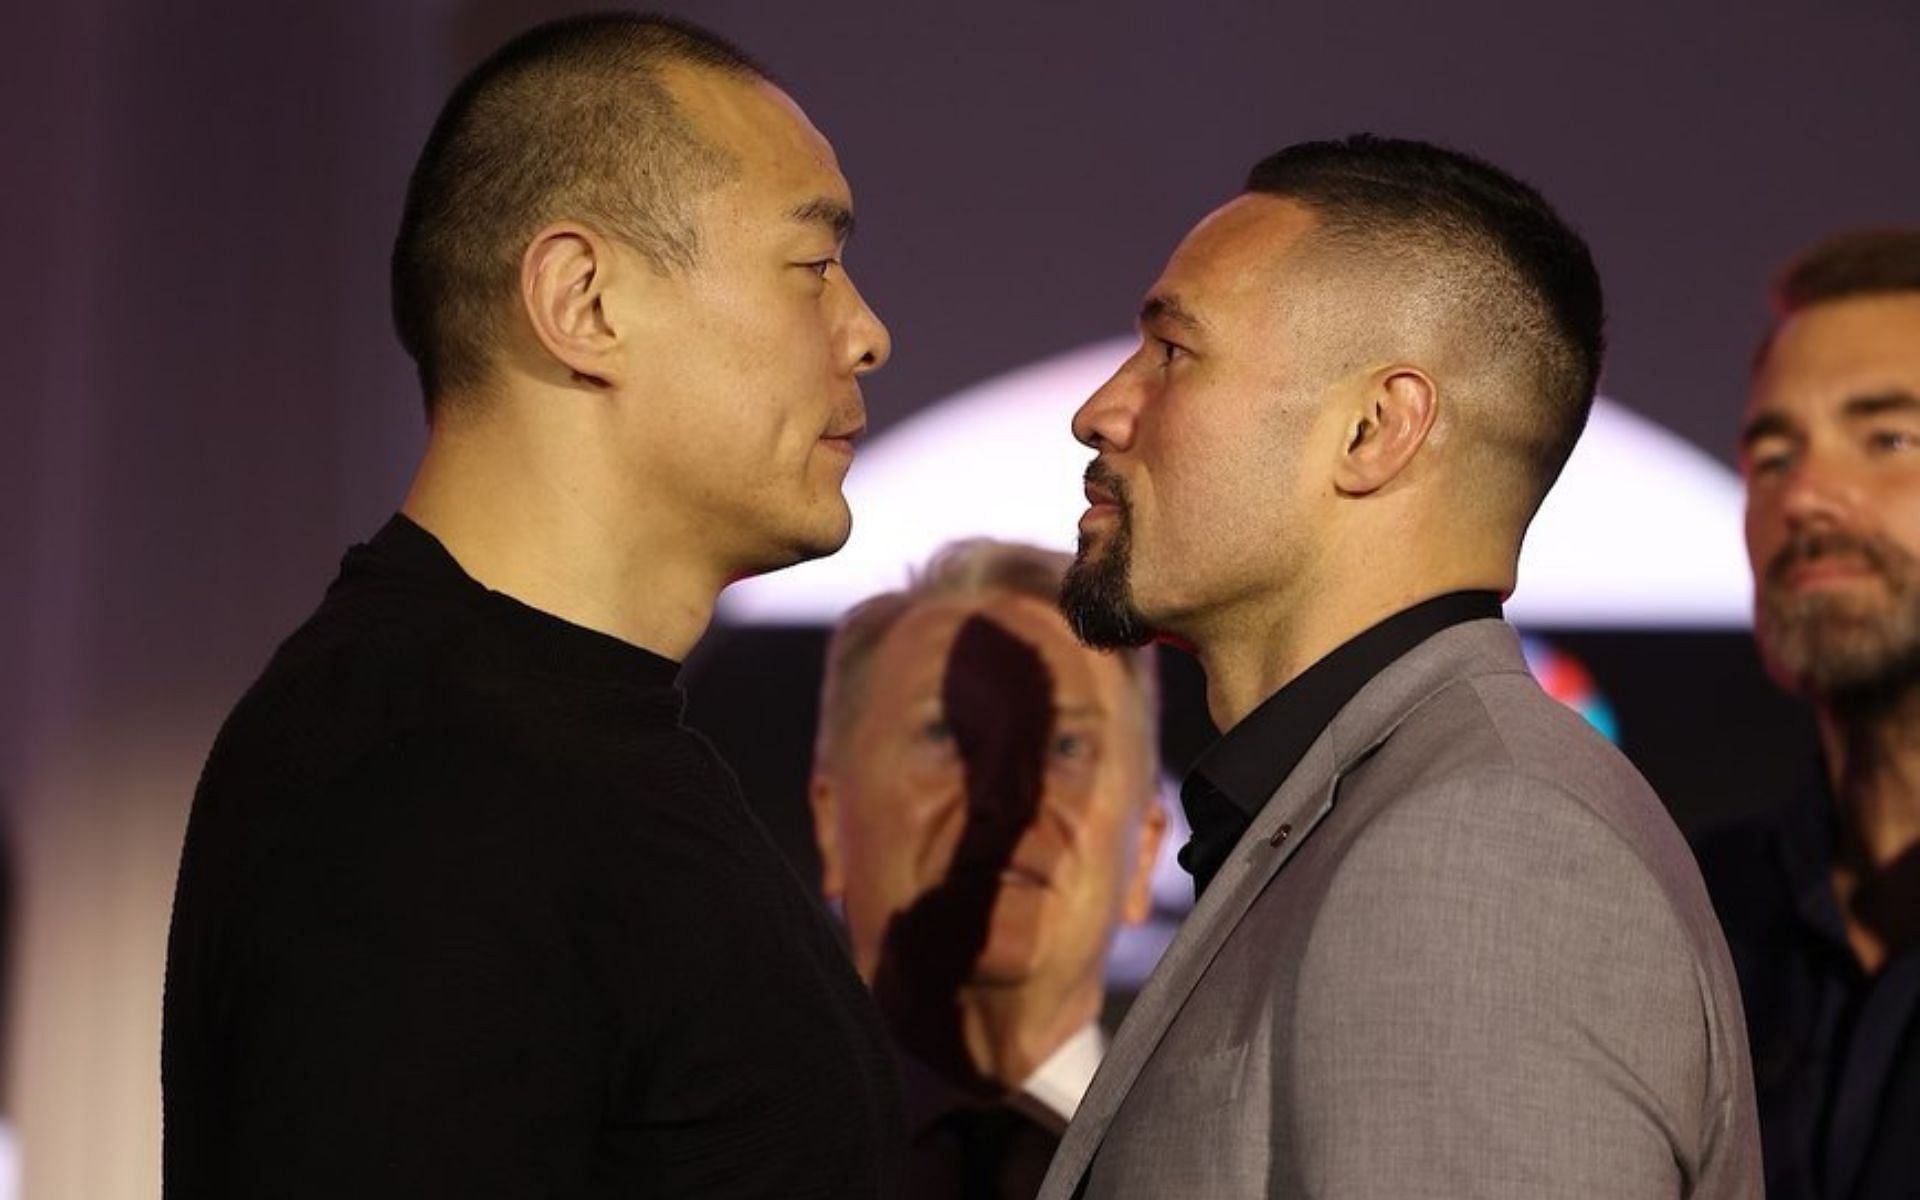 Zhilei Zhang (left) and Joseph Parker (right) faced off on March 9 [Image credits: @daznboxing on Instagram]